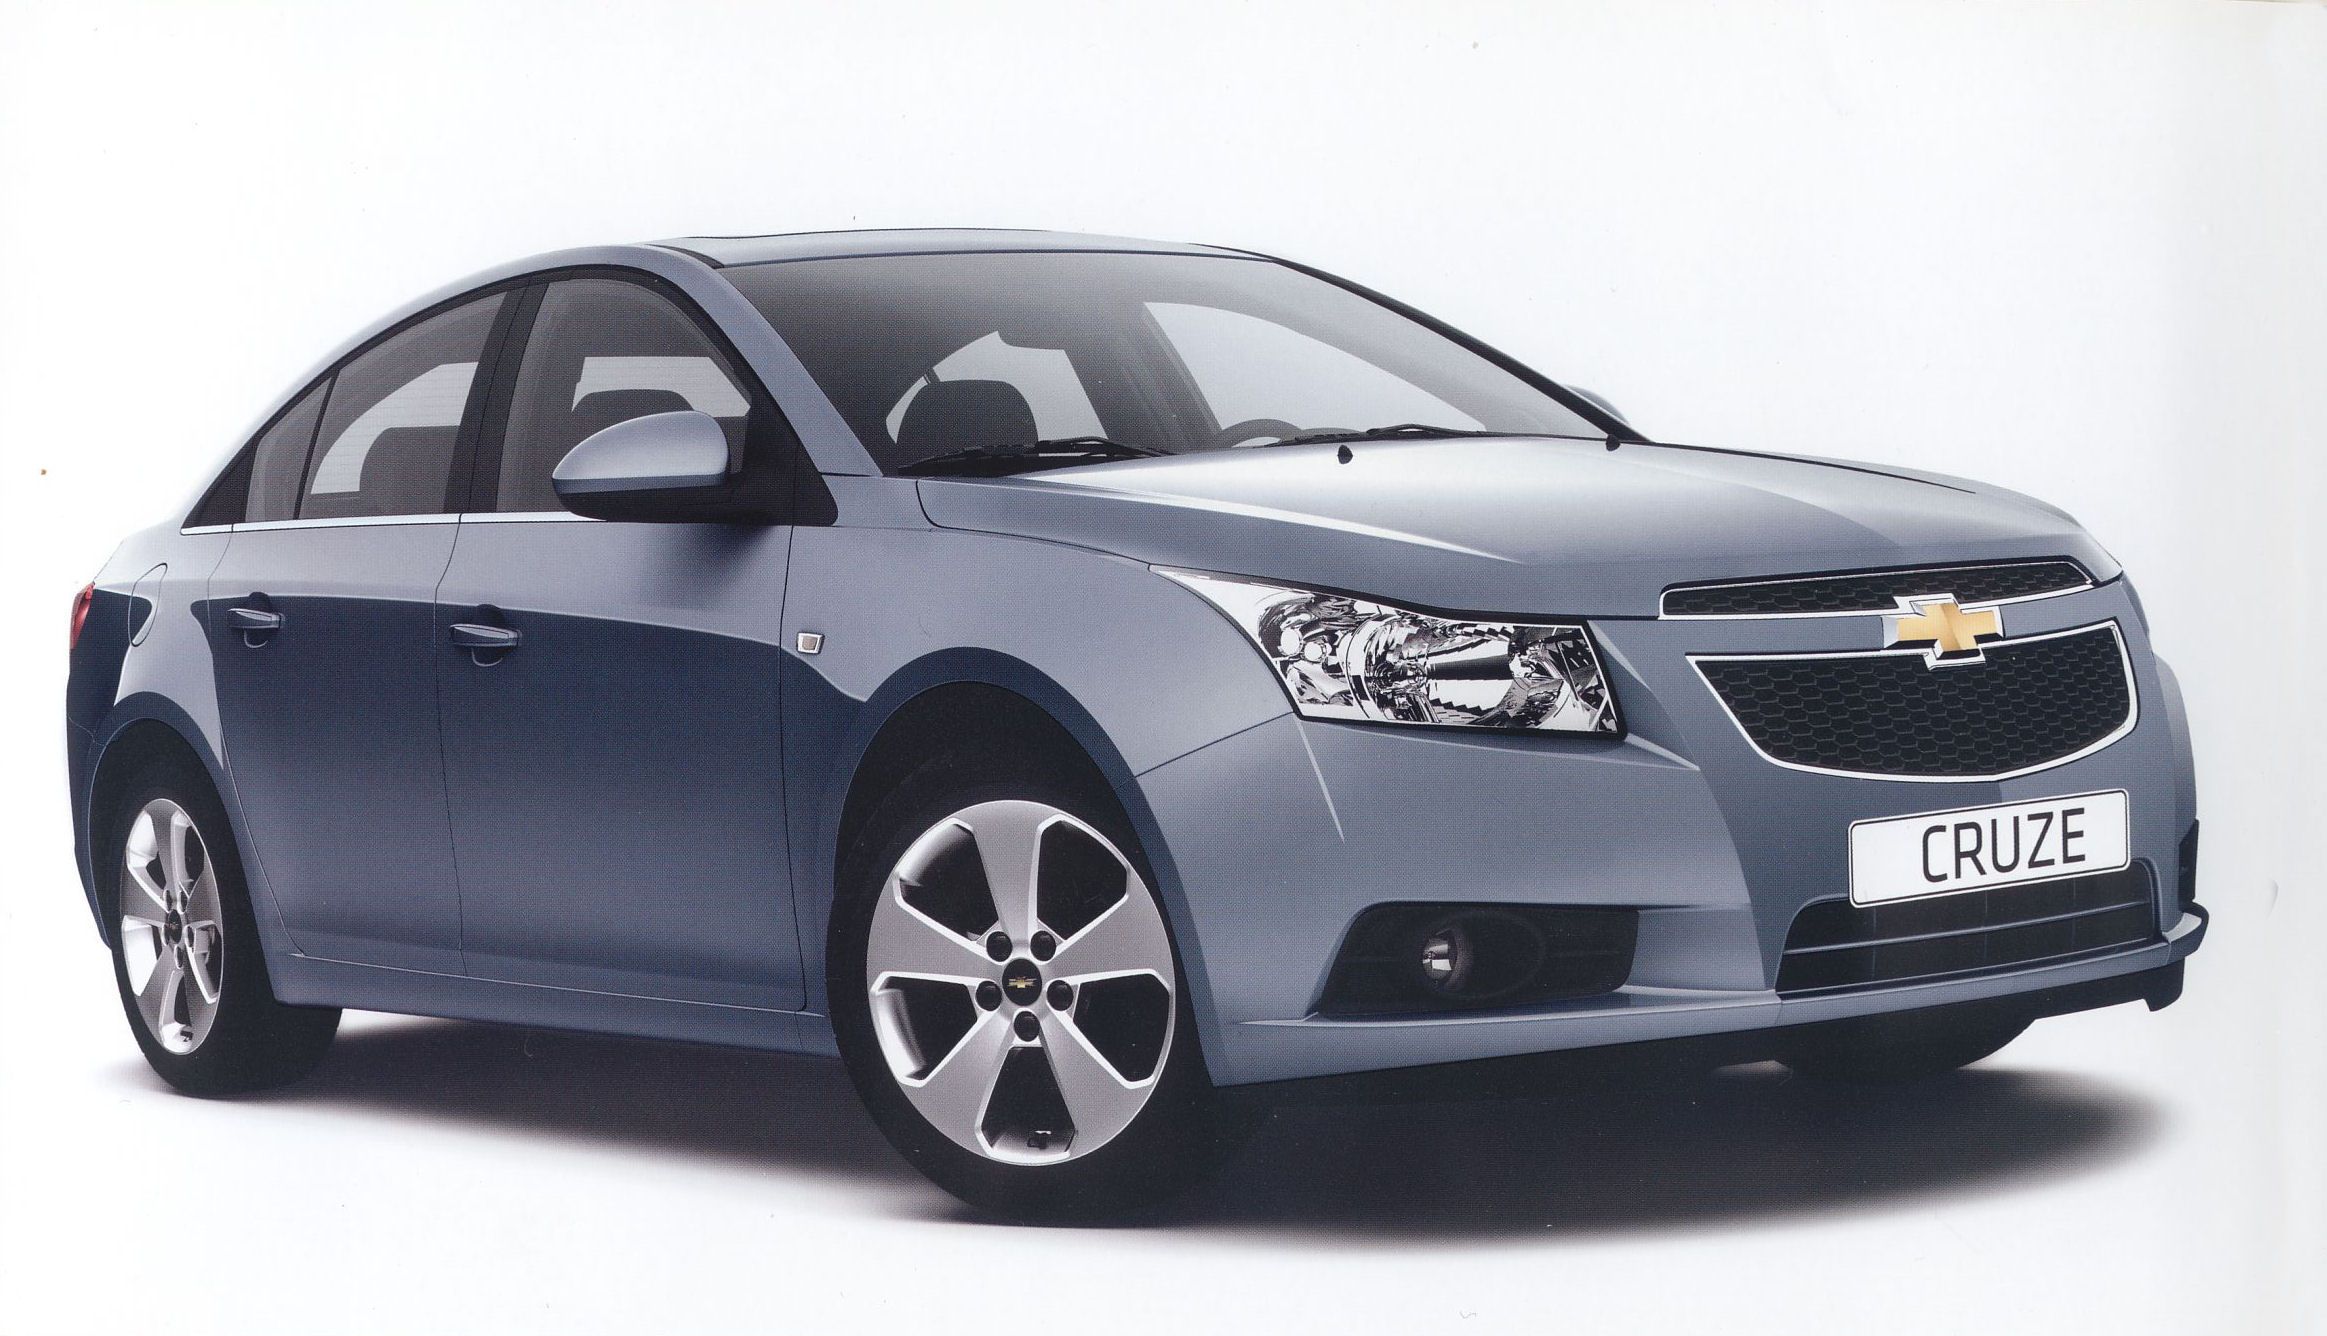 Chevrolet Cruze 2008 Review, Amazing Pictures and Images